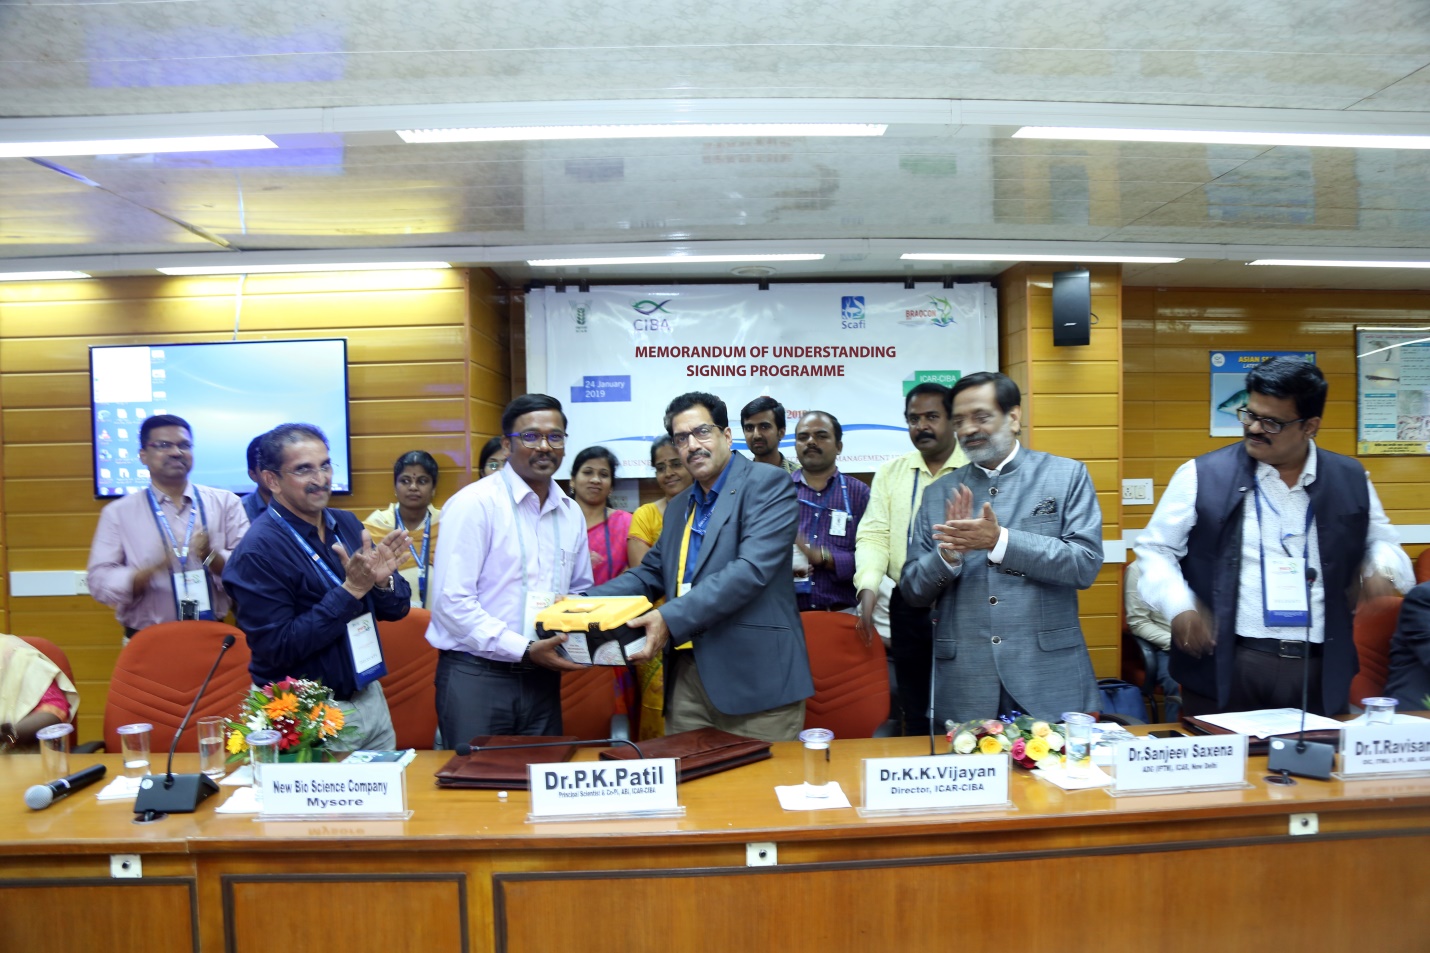 ICAR-CIBA Signed MOU With New Bio Science Co., Mysore, Karnataka For The Transfer Of Multiparameter water analysis kit